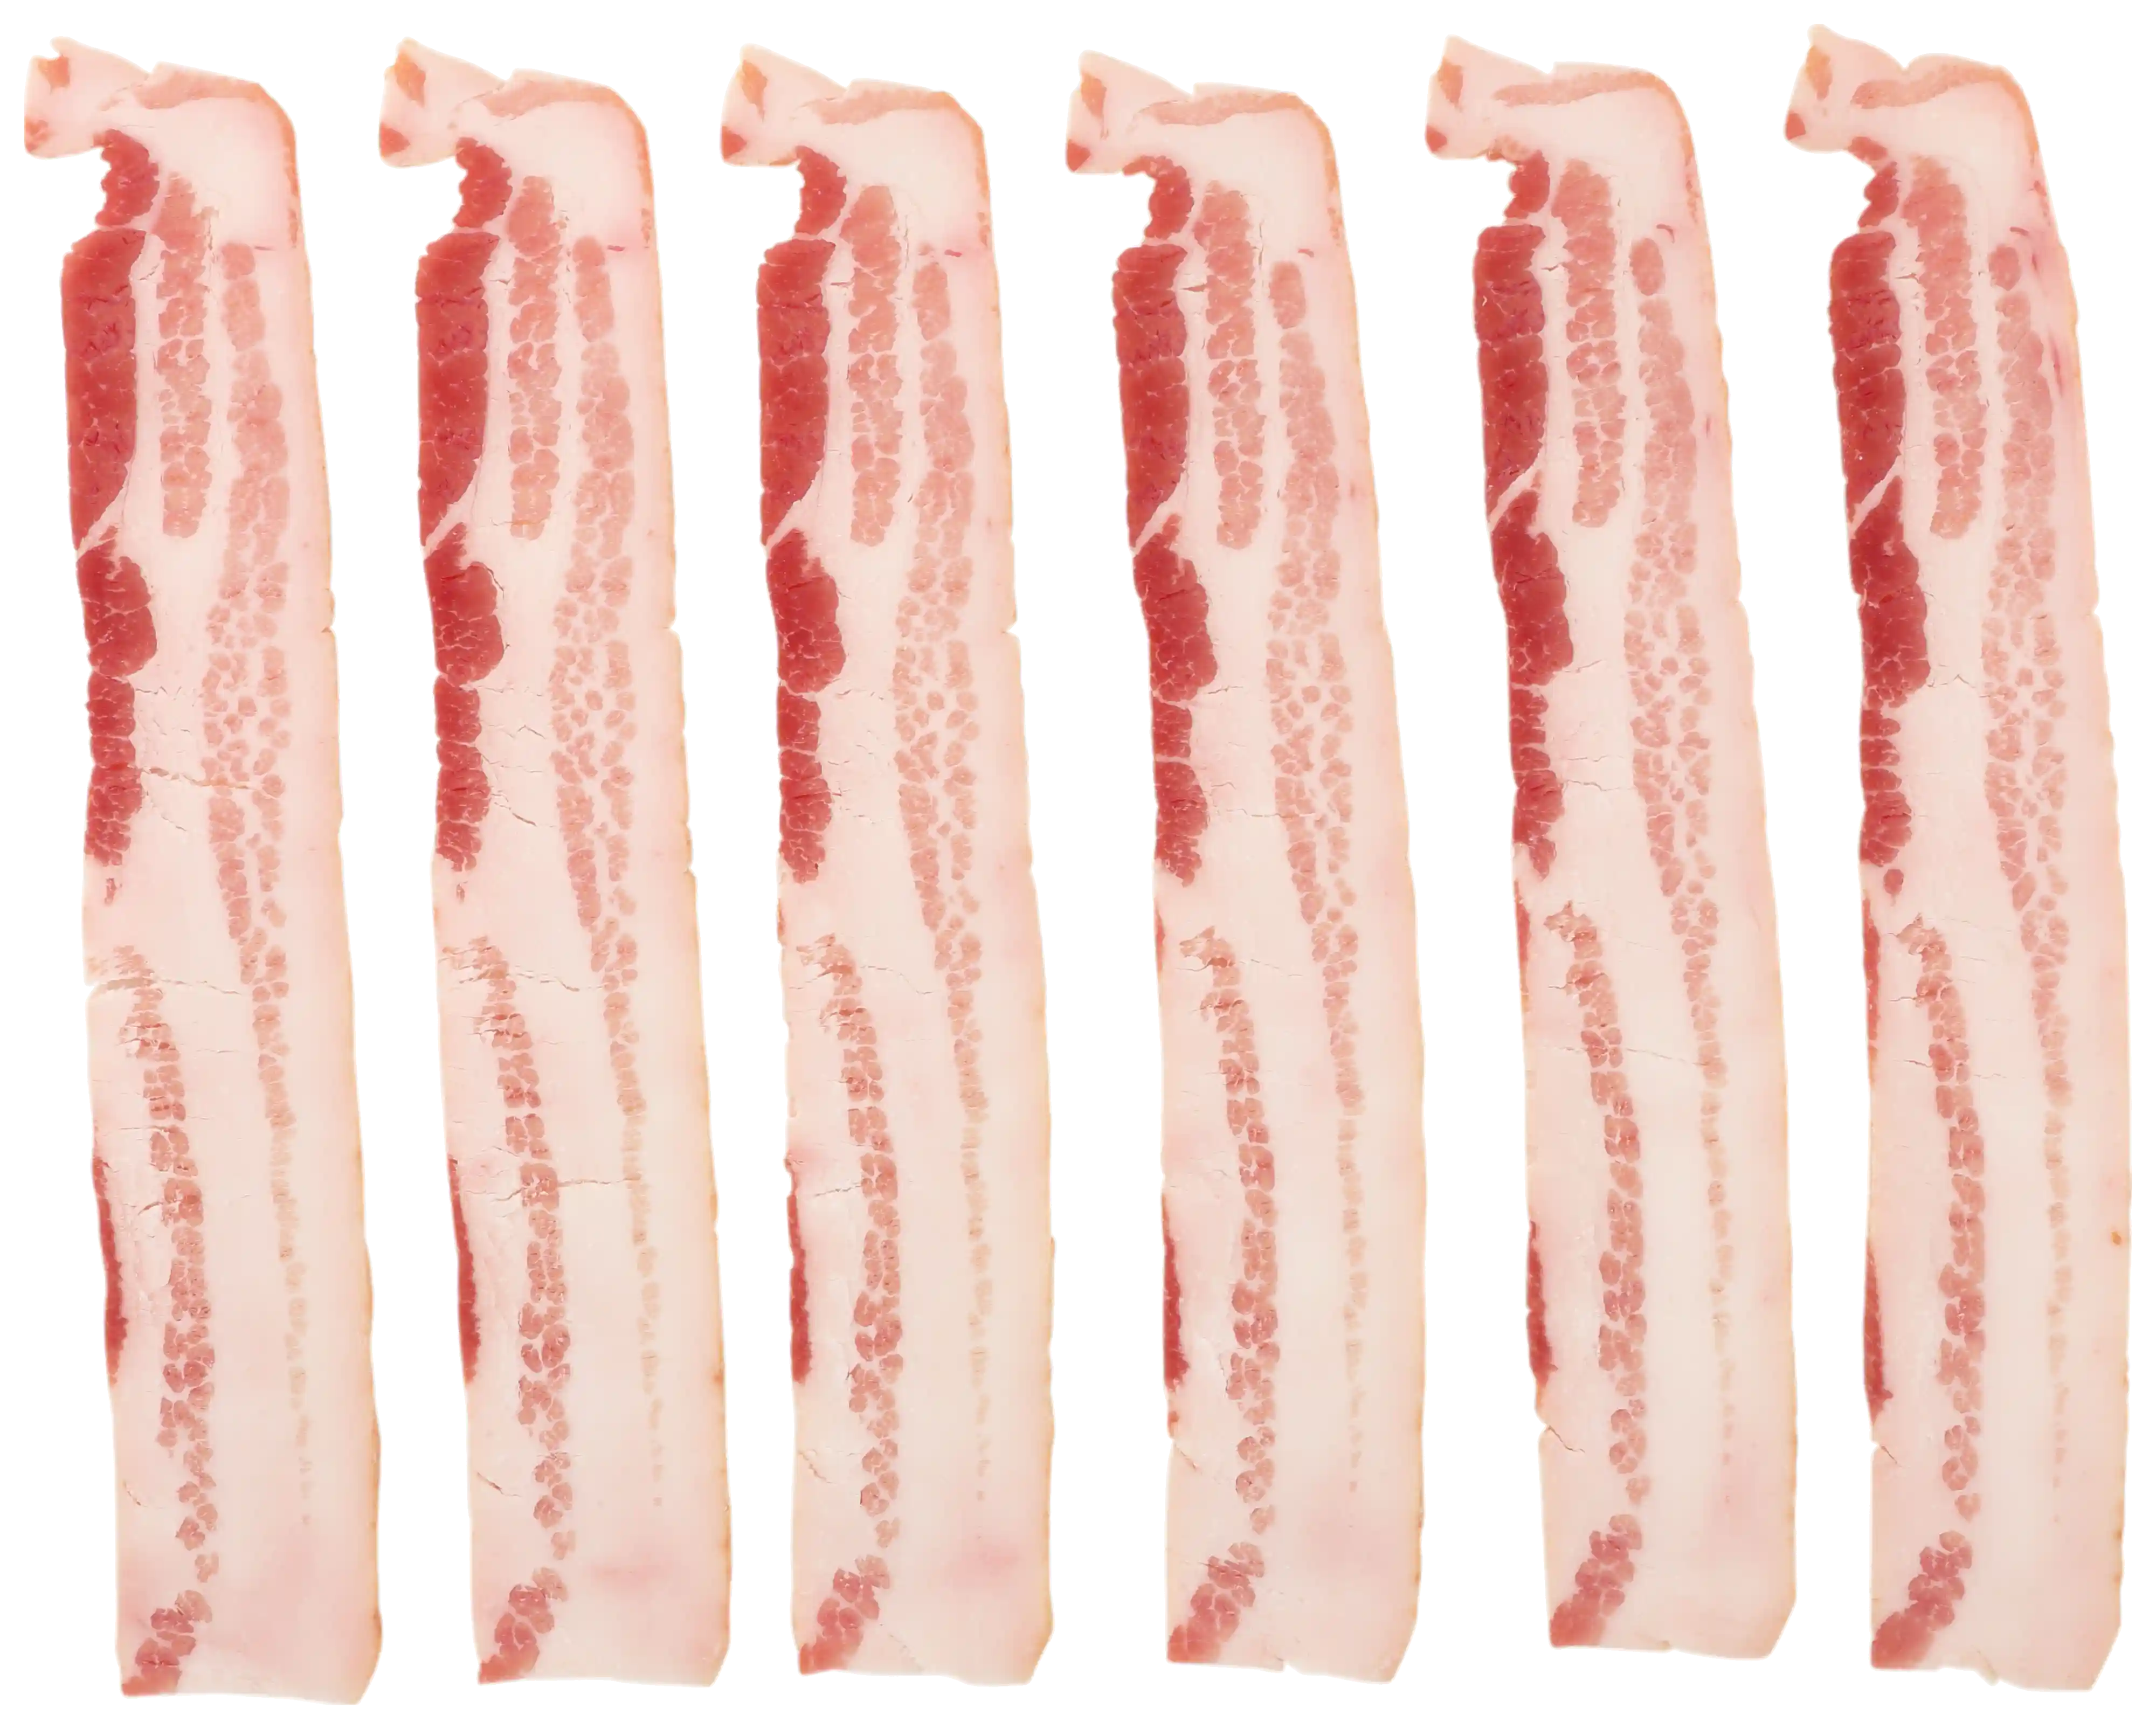 Wright® Brand Naturally Hickory Smoked Thin Sliced Bacon, Bulk, 30 Lbs, 18-22 Slices per Pound, Frozen_image_21